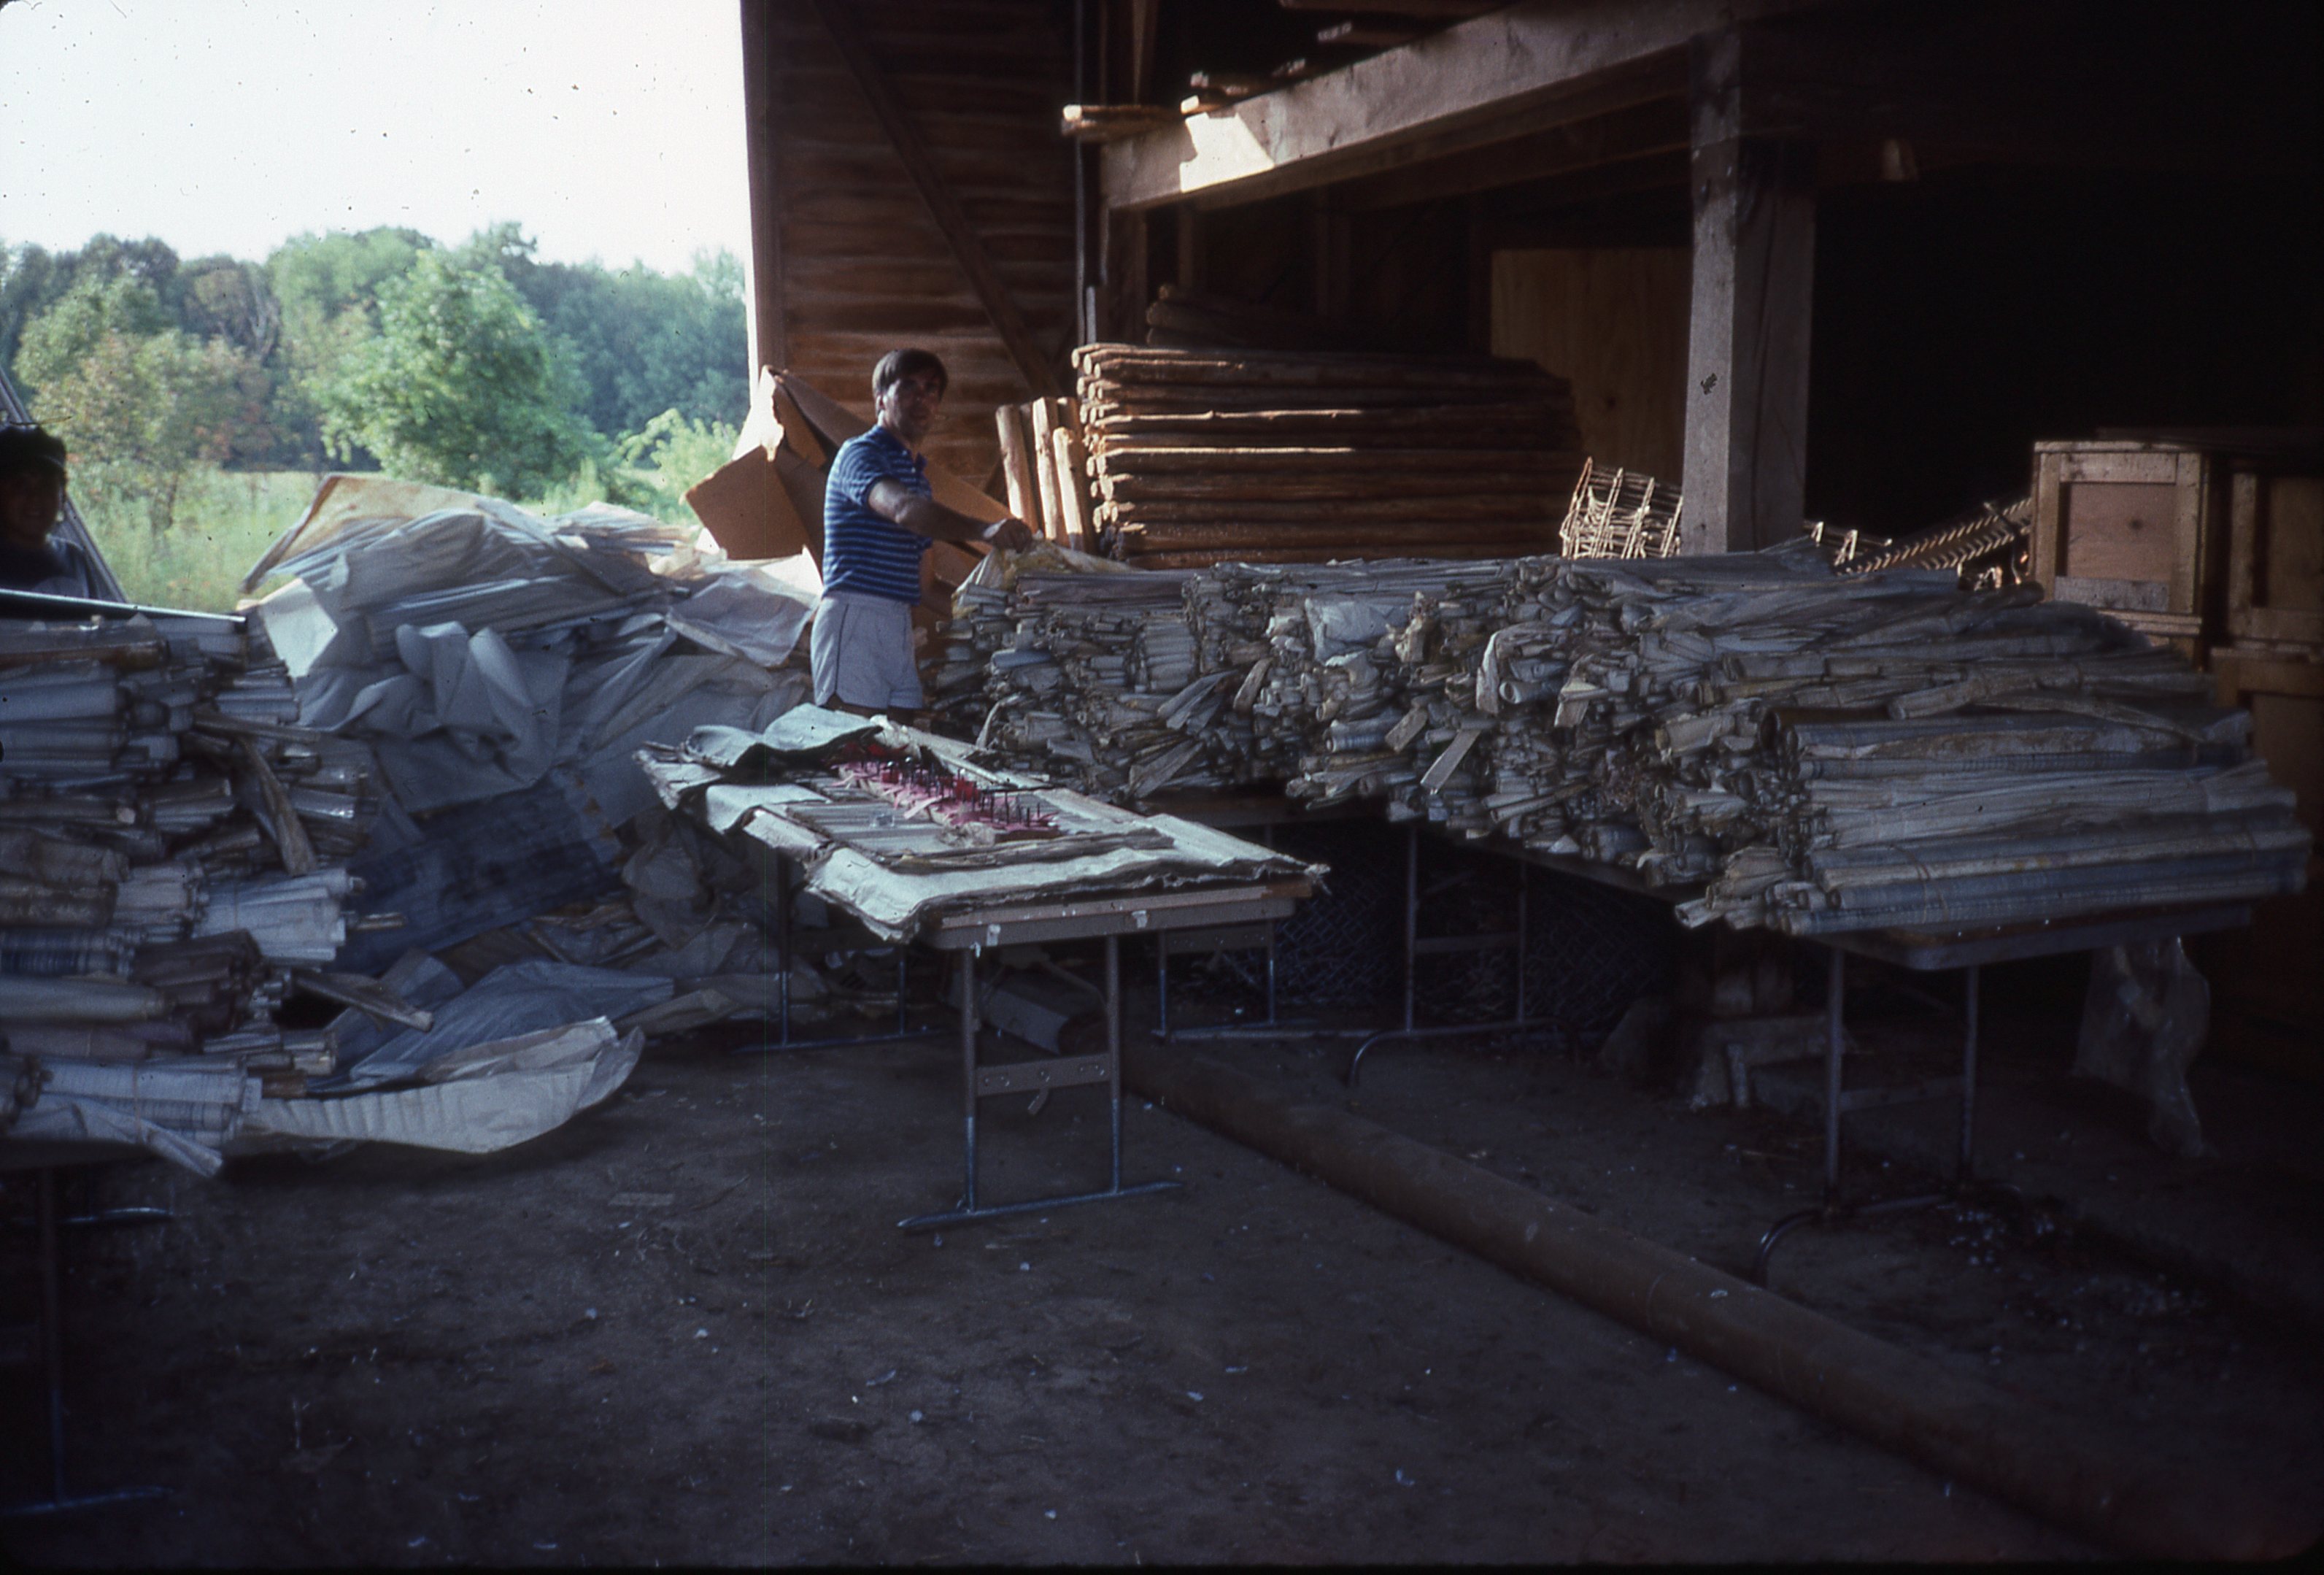 Ken sorting and drying wet drawings in a local barn.